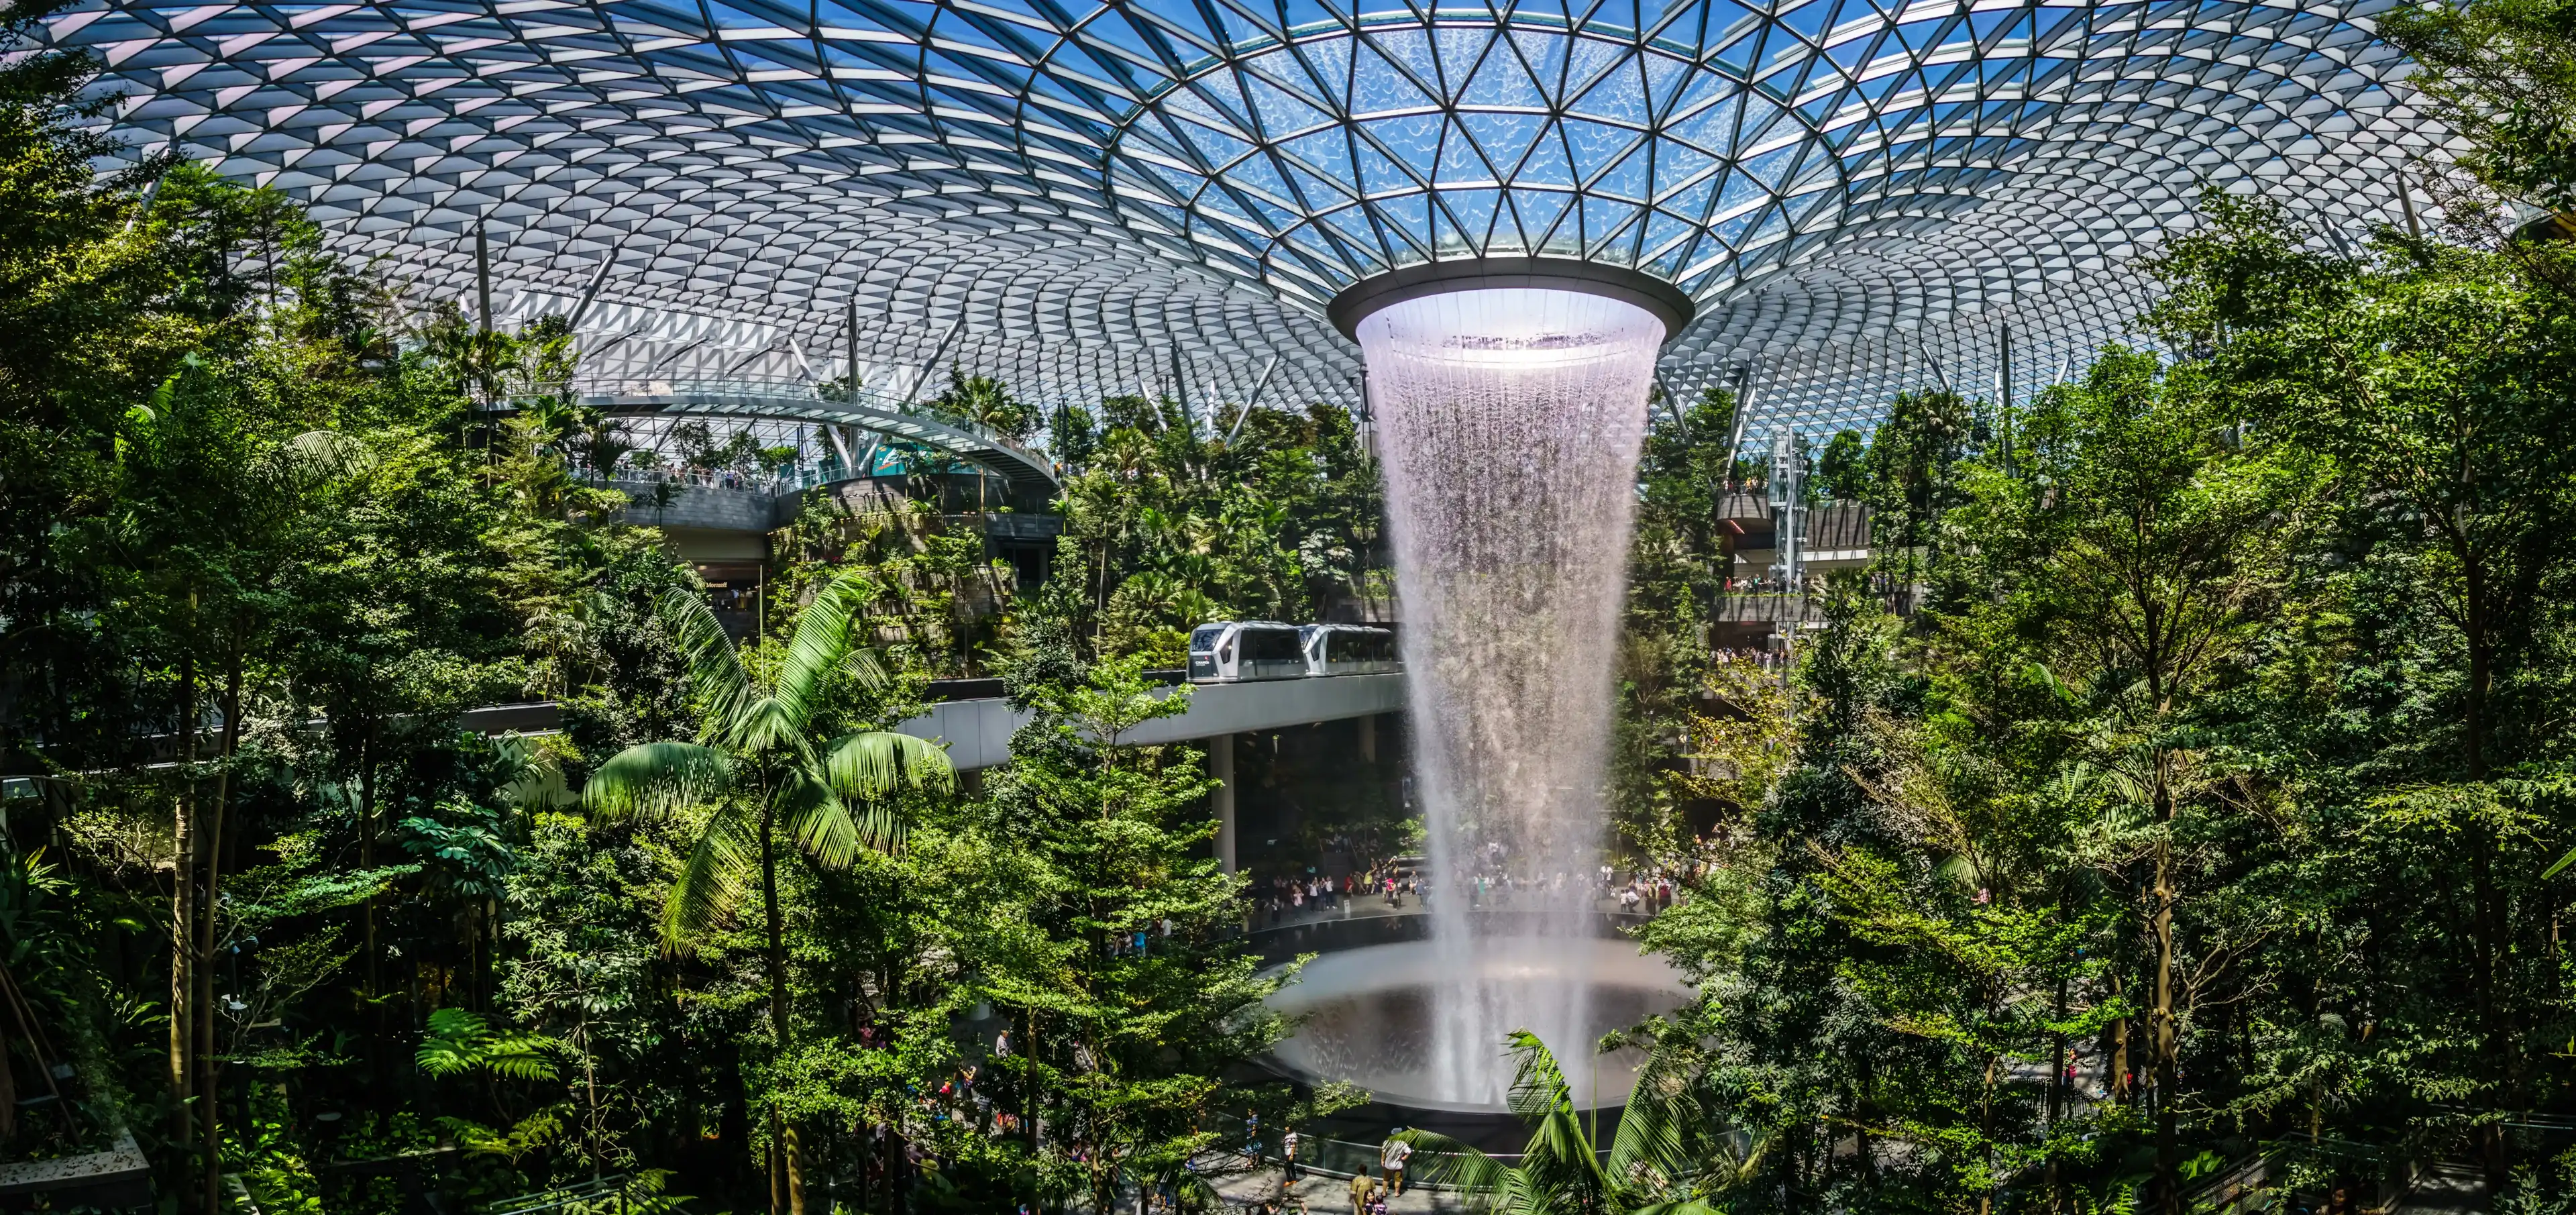 Singapore - Apr 16, 2019: Jewel Changi Airport is a mixed-use development at Changi Airport in Singapore that opened on 17 April 2019.